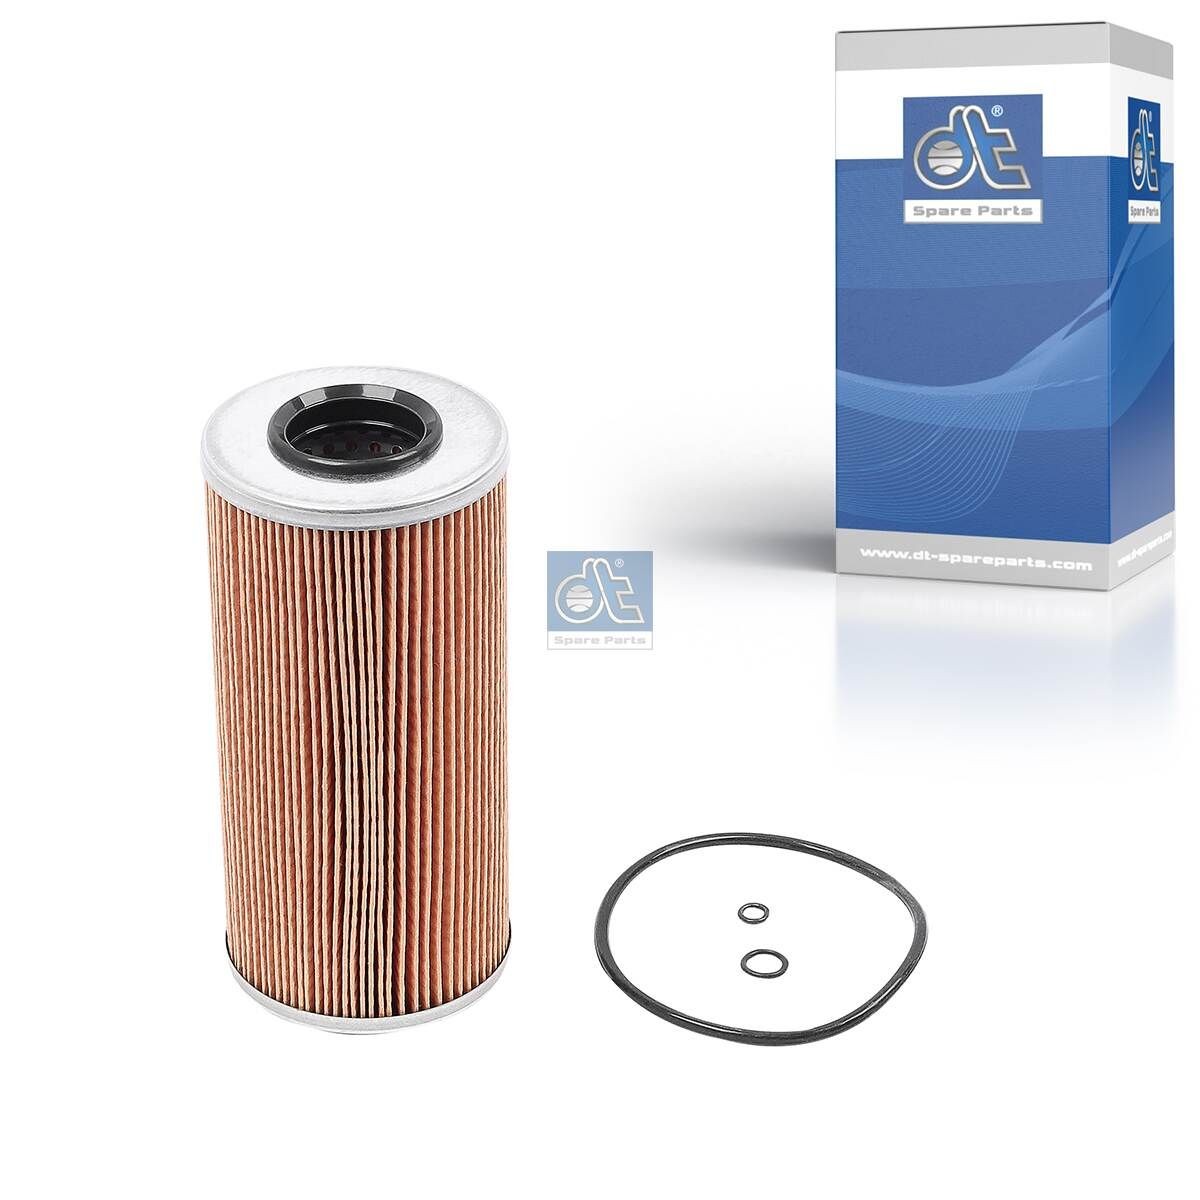 HU 951 x DT Spare Parts 3.14108 Oil filter 606 180 0009 67